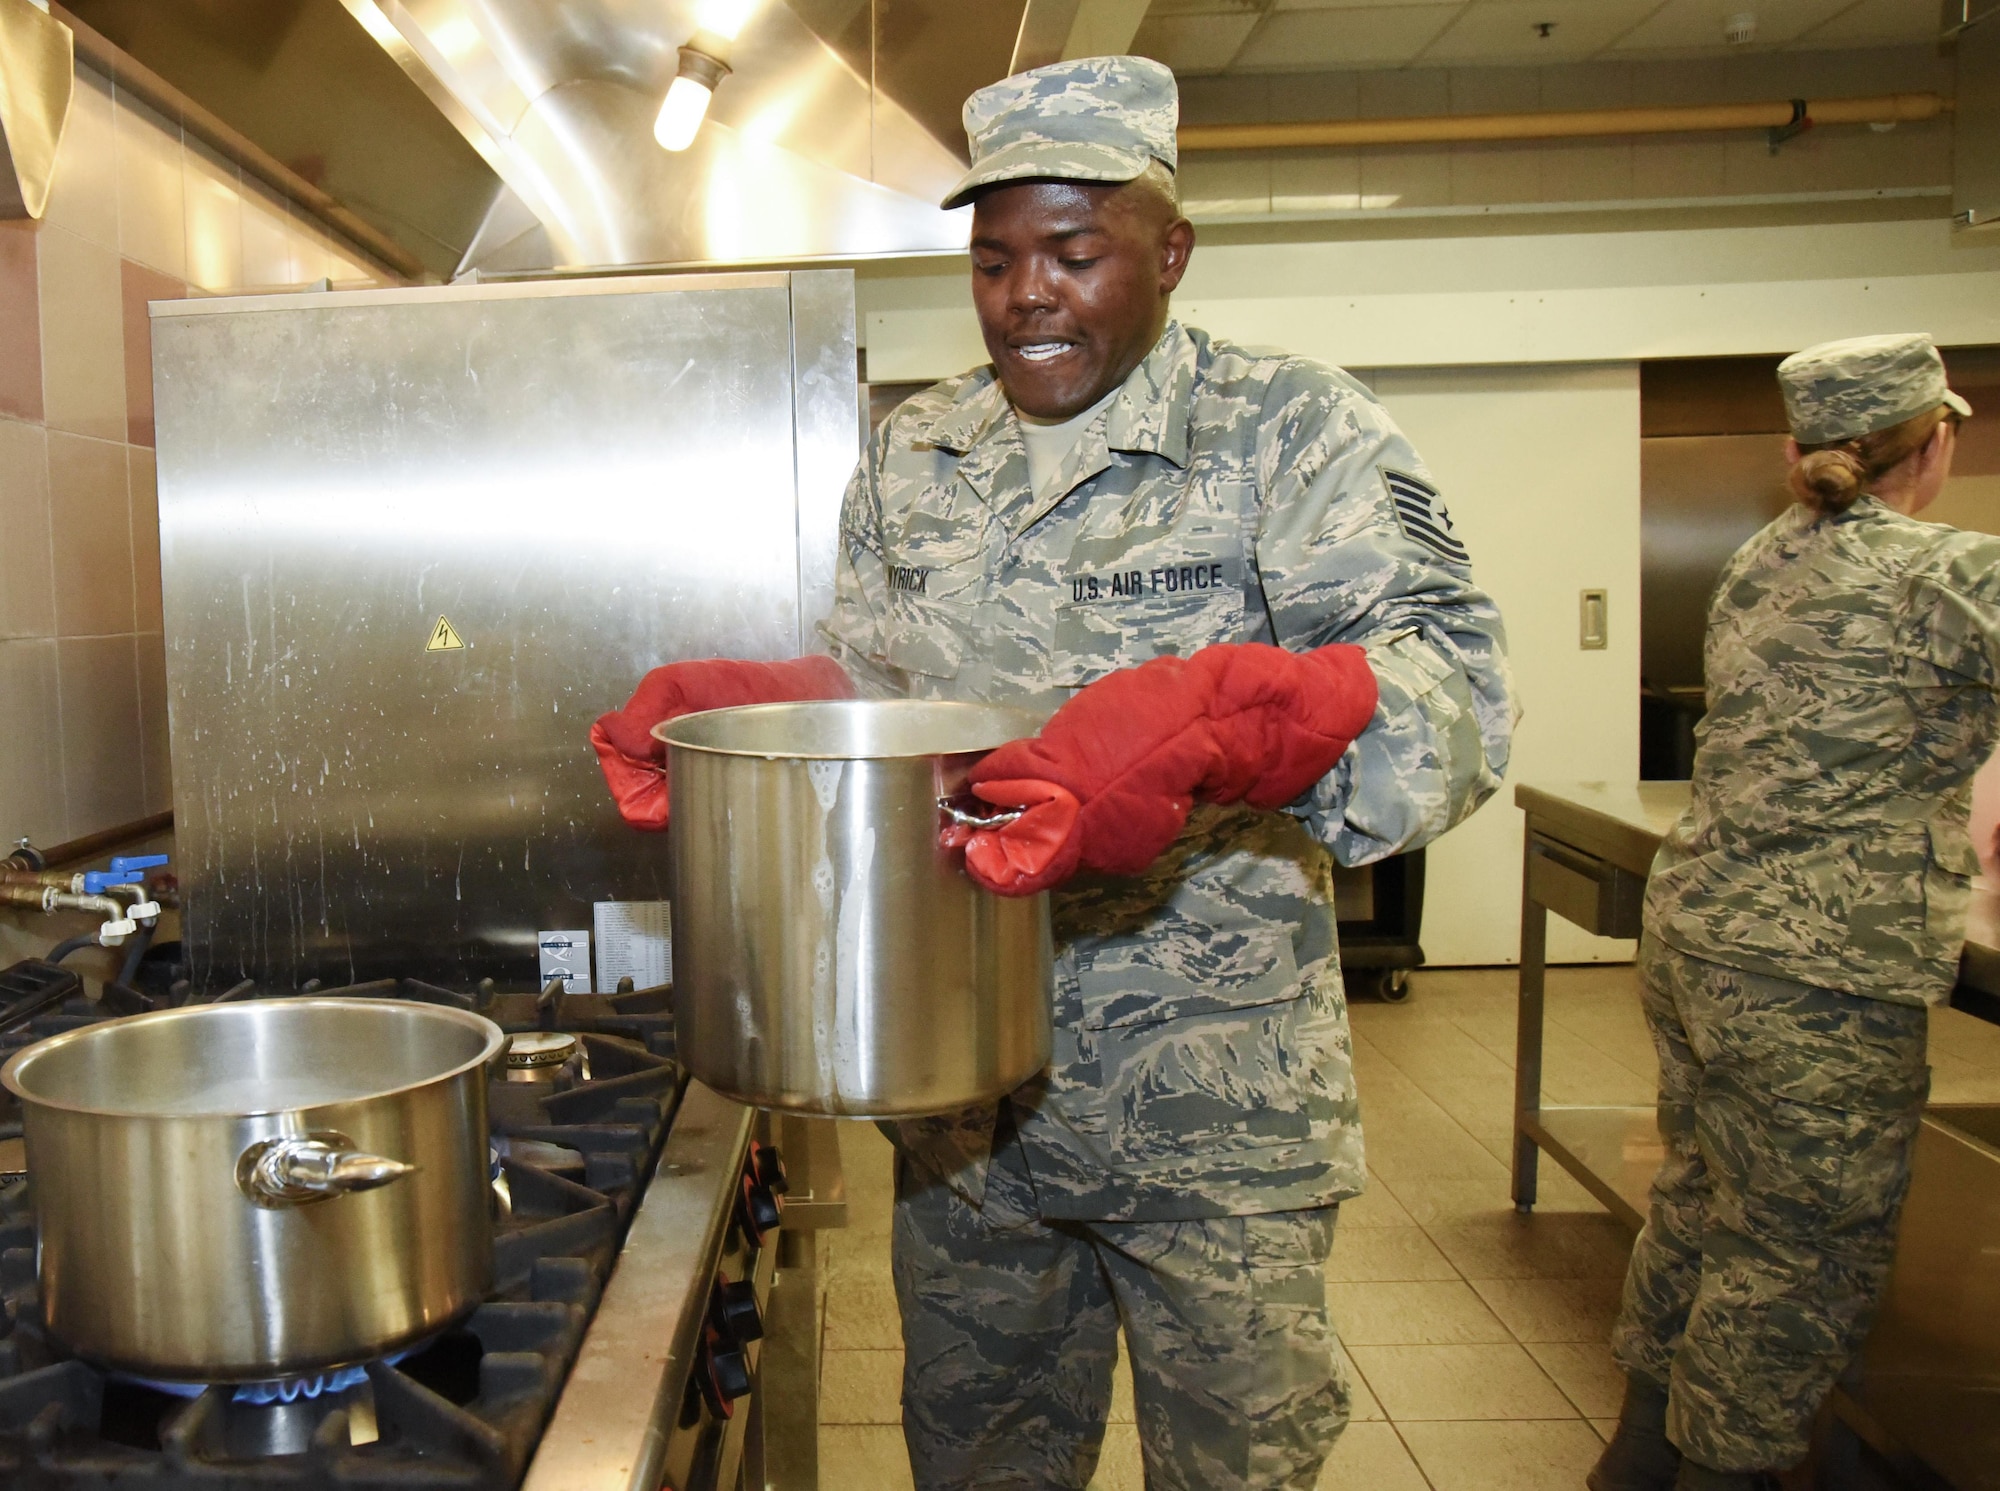 AVIANO AIR BASE, Italy -- Tech. Sgt. Brandon Wyrick, a 301st Fighter Wing Force Support Squadron food service technician, prepares to strain a fresh pot of spaghetti from boiling water and take it to the serving line at La Dulce Vida Dining Facility at Aviano Air Base, Italy.  Working stations during their annual tour included food preparation, cooking, baking, serving on the line, fruit bar, salad bar, cashier, beverages, dishes and clean-up to name a few. (U.S. Air Force photo by Tech. Sgt. Jeremy Roman)